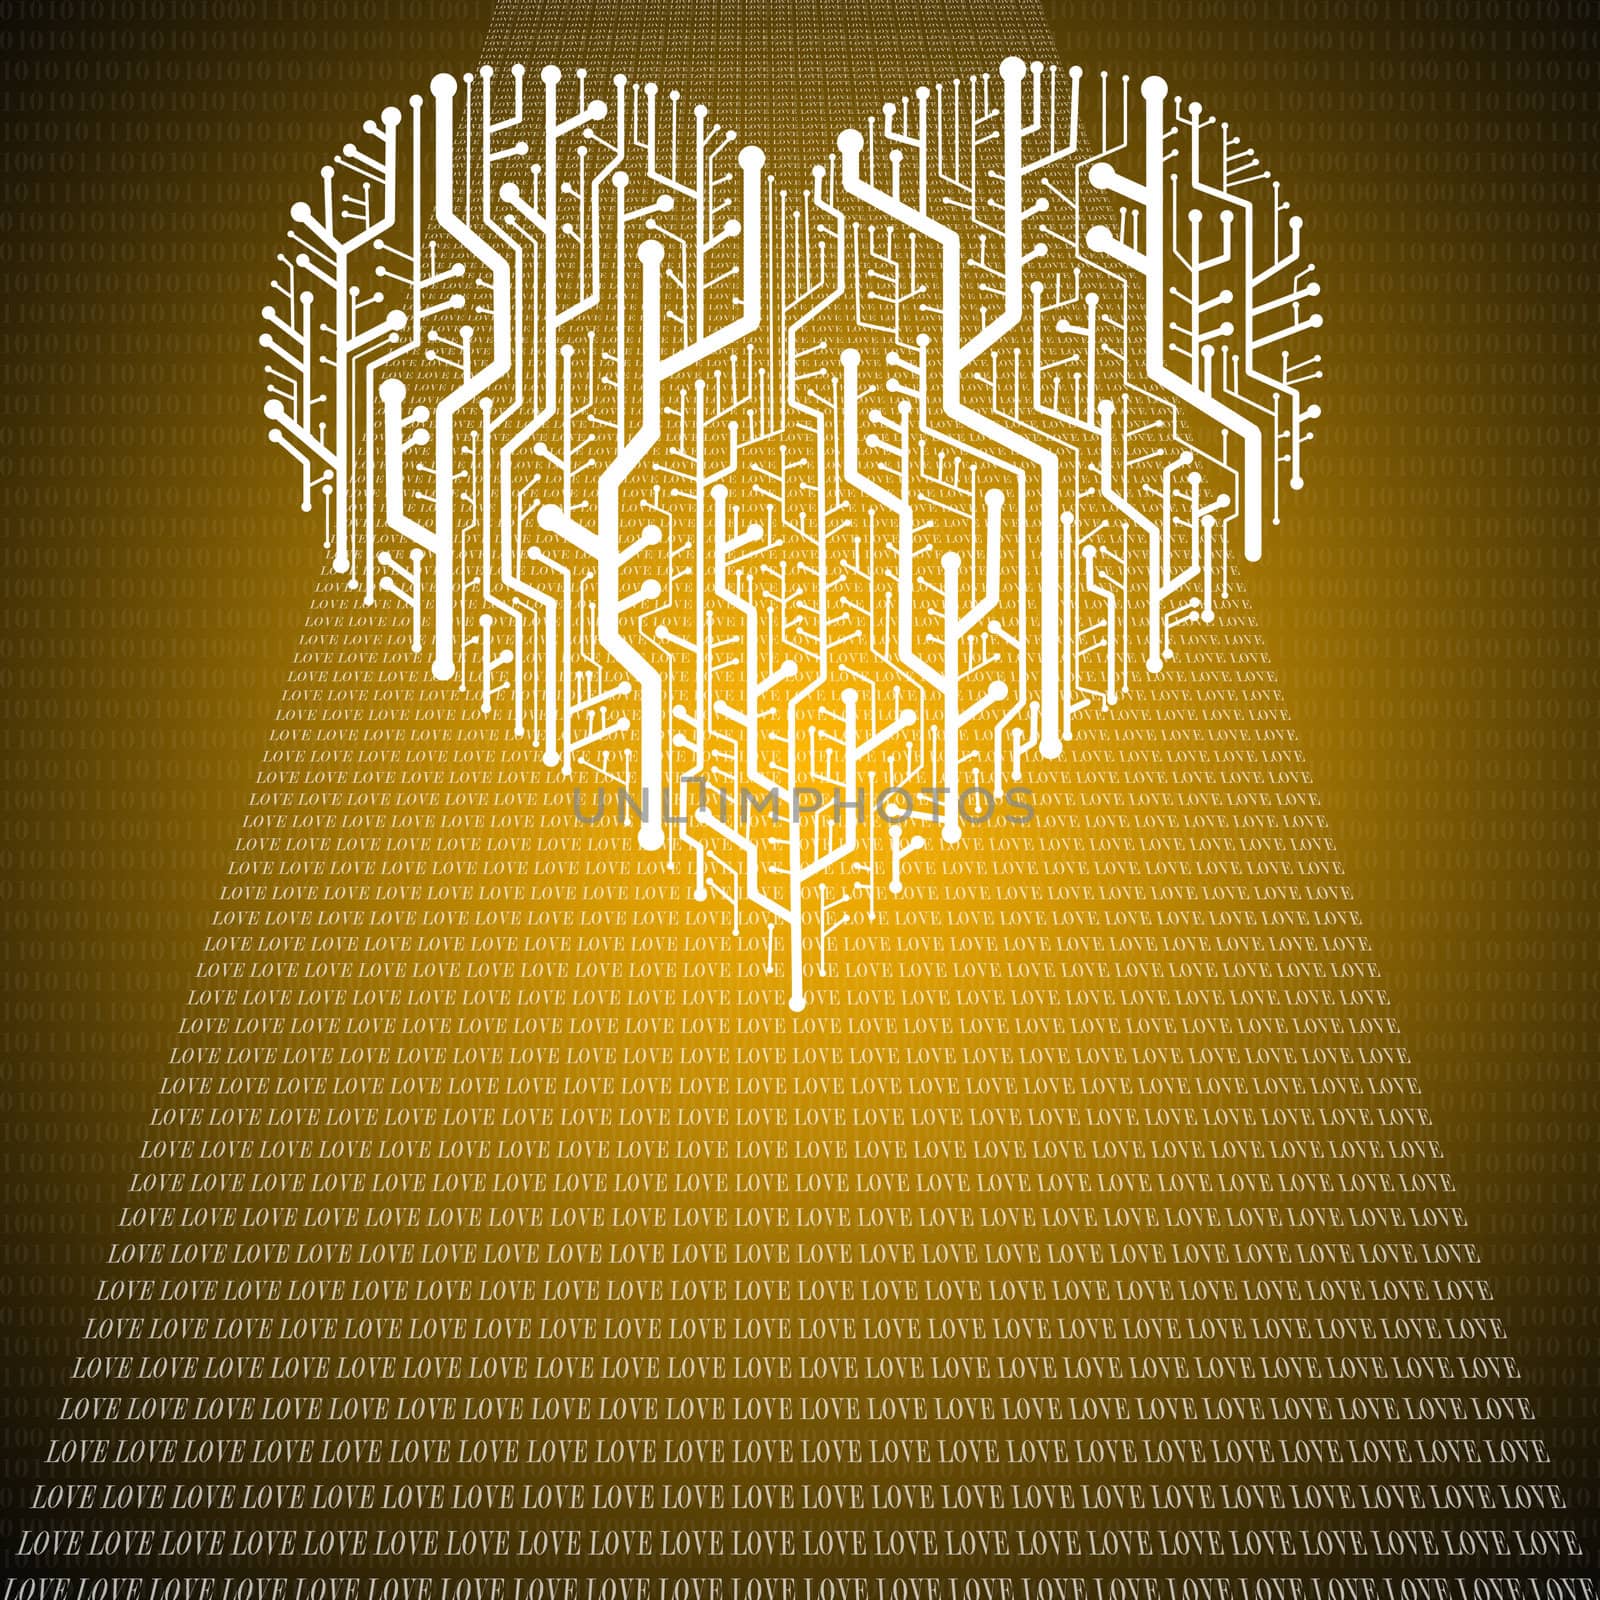 Circuit board in Heart shape, Technology background  by pixbox77